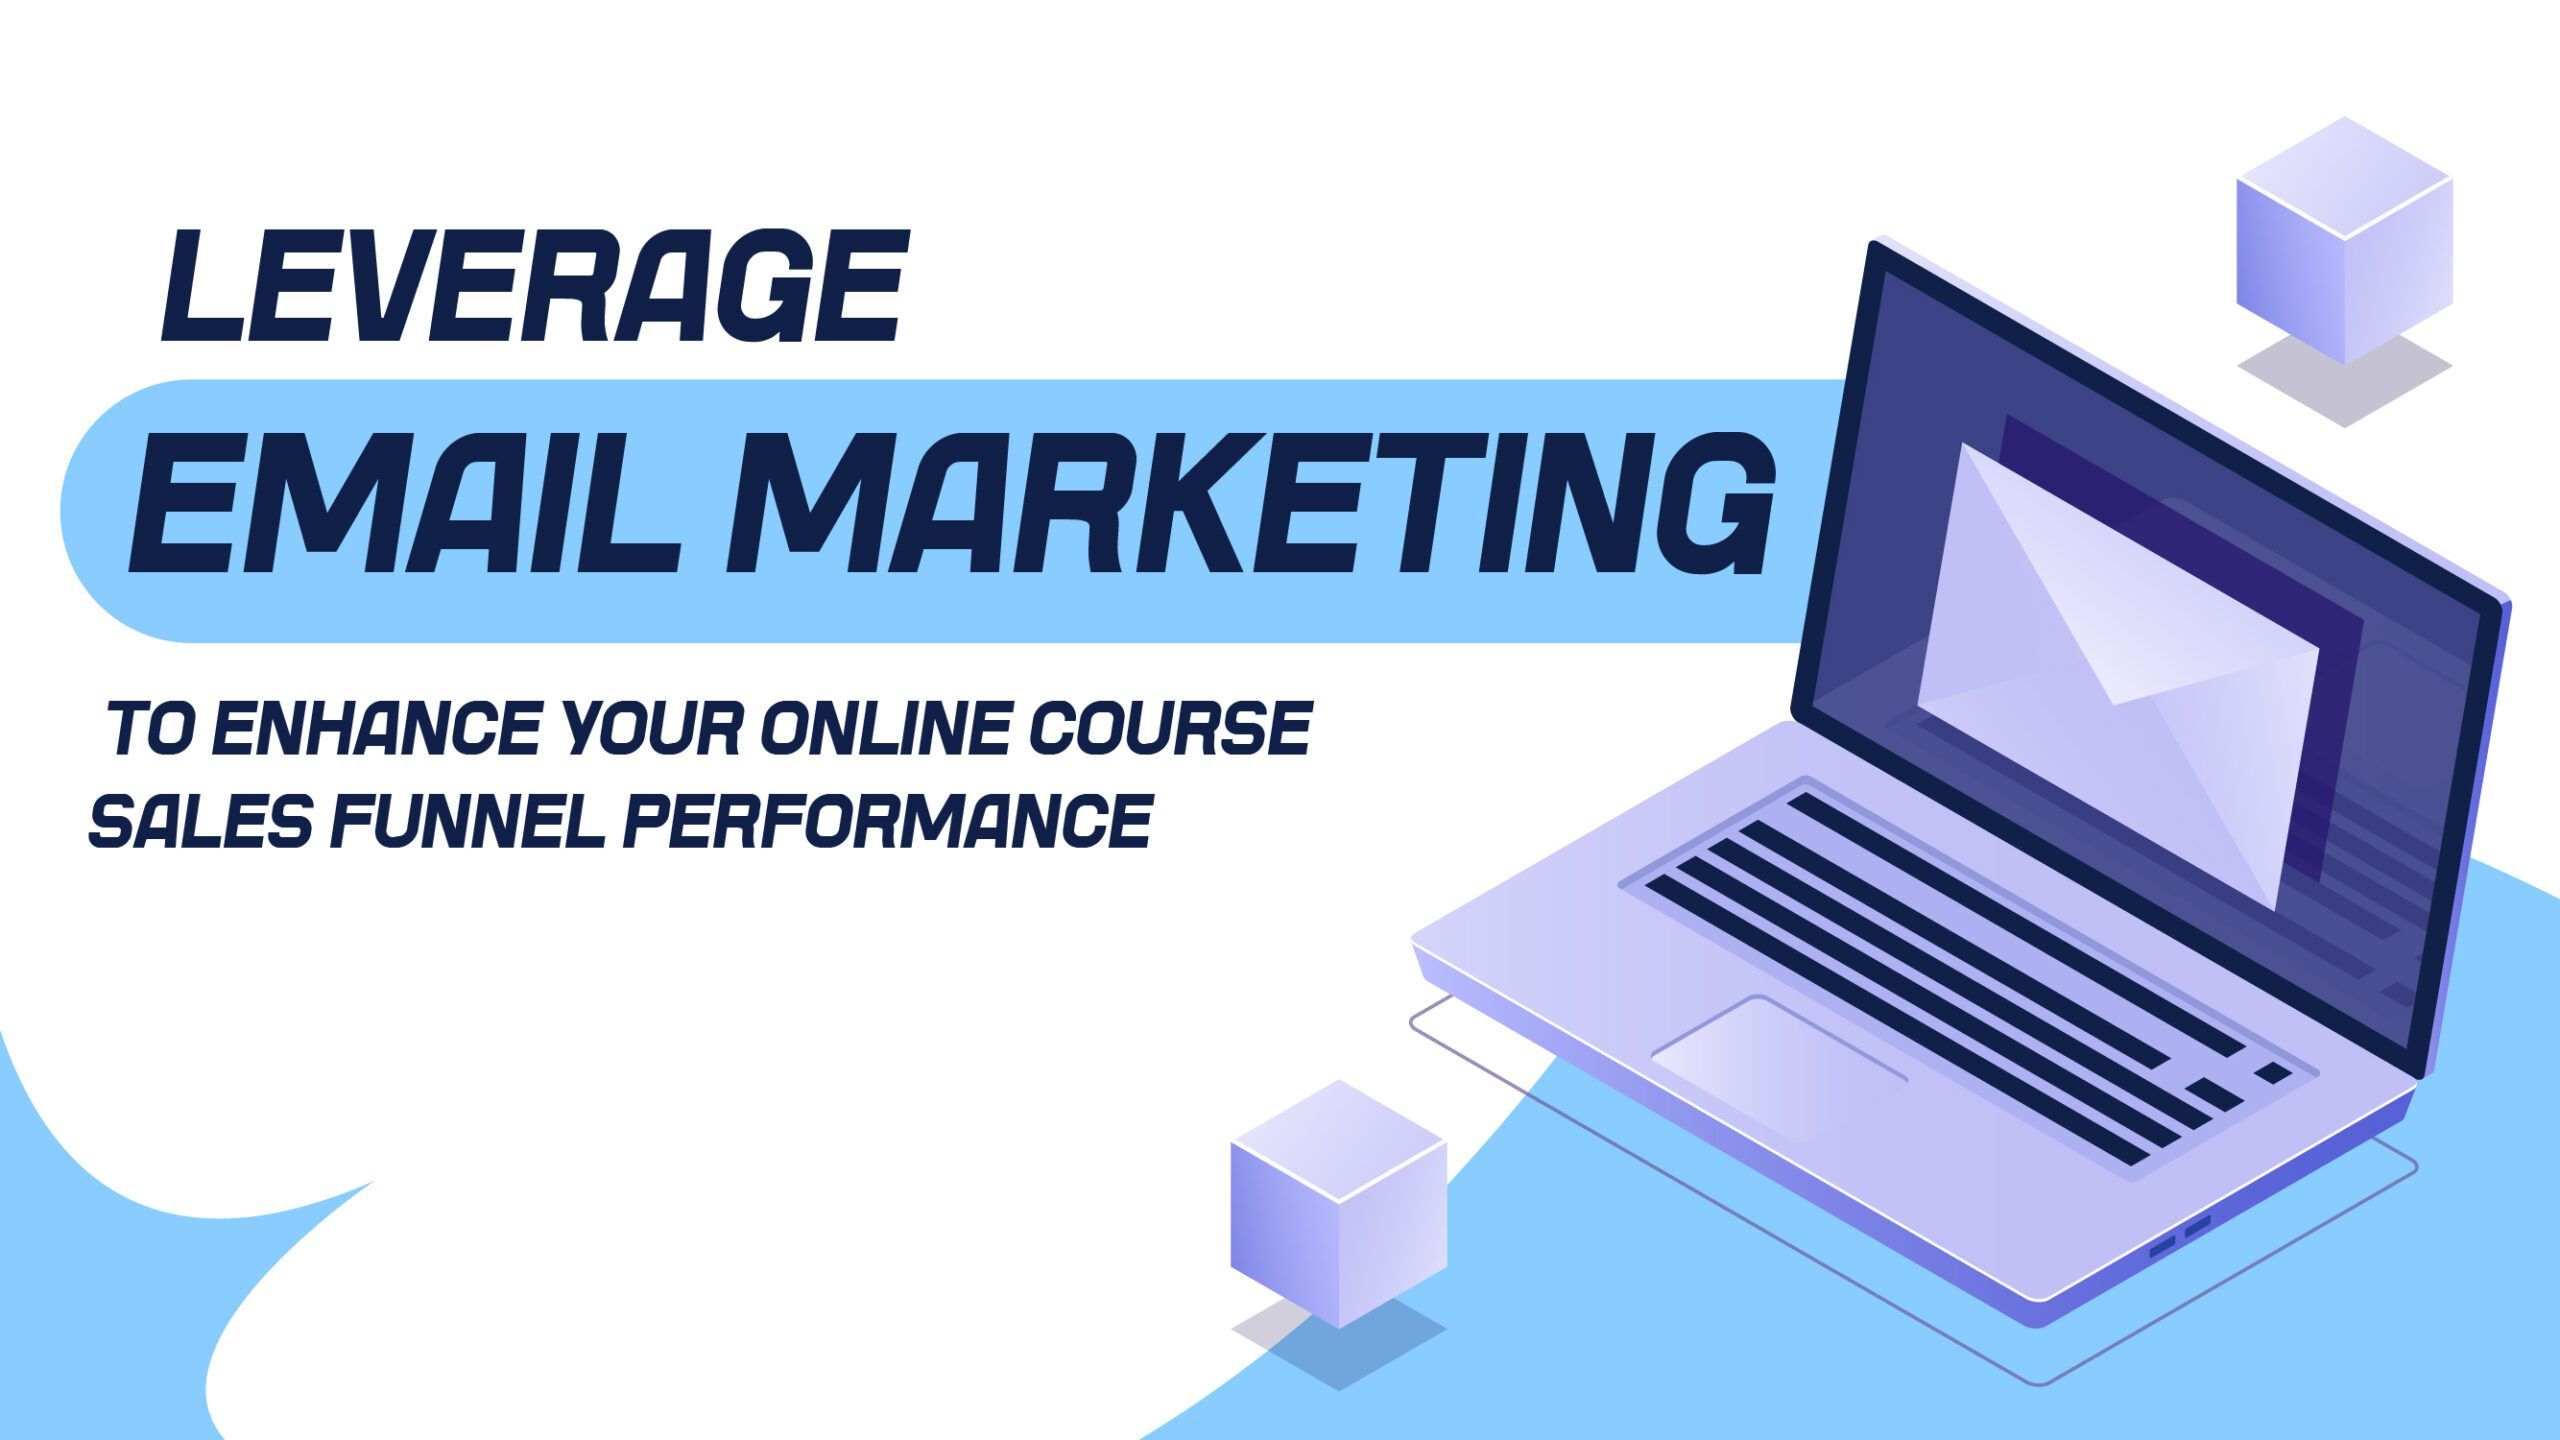 Leverage Email Marketing to Enhance Your Online Course Sales Funnel Performance